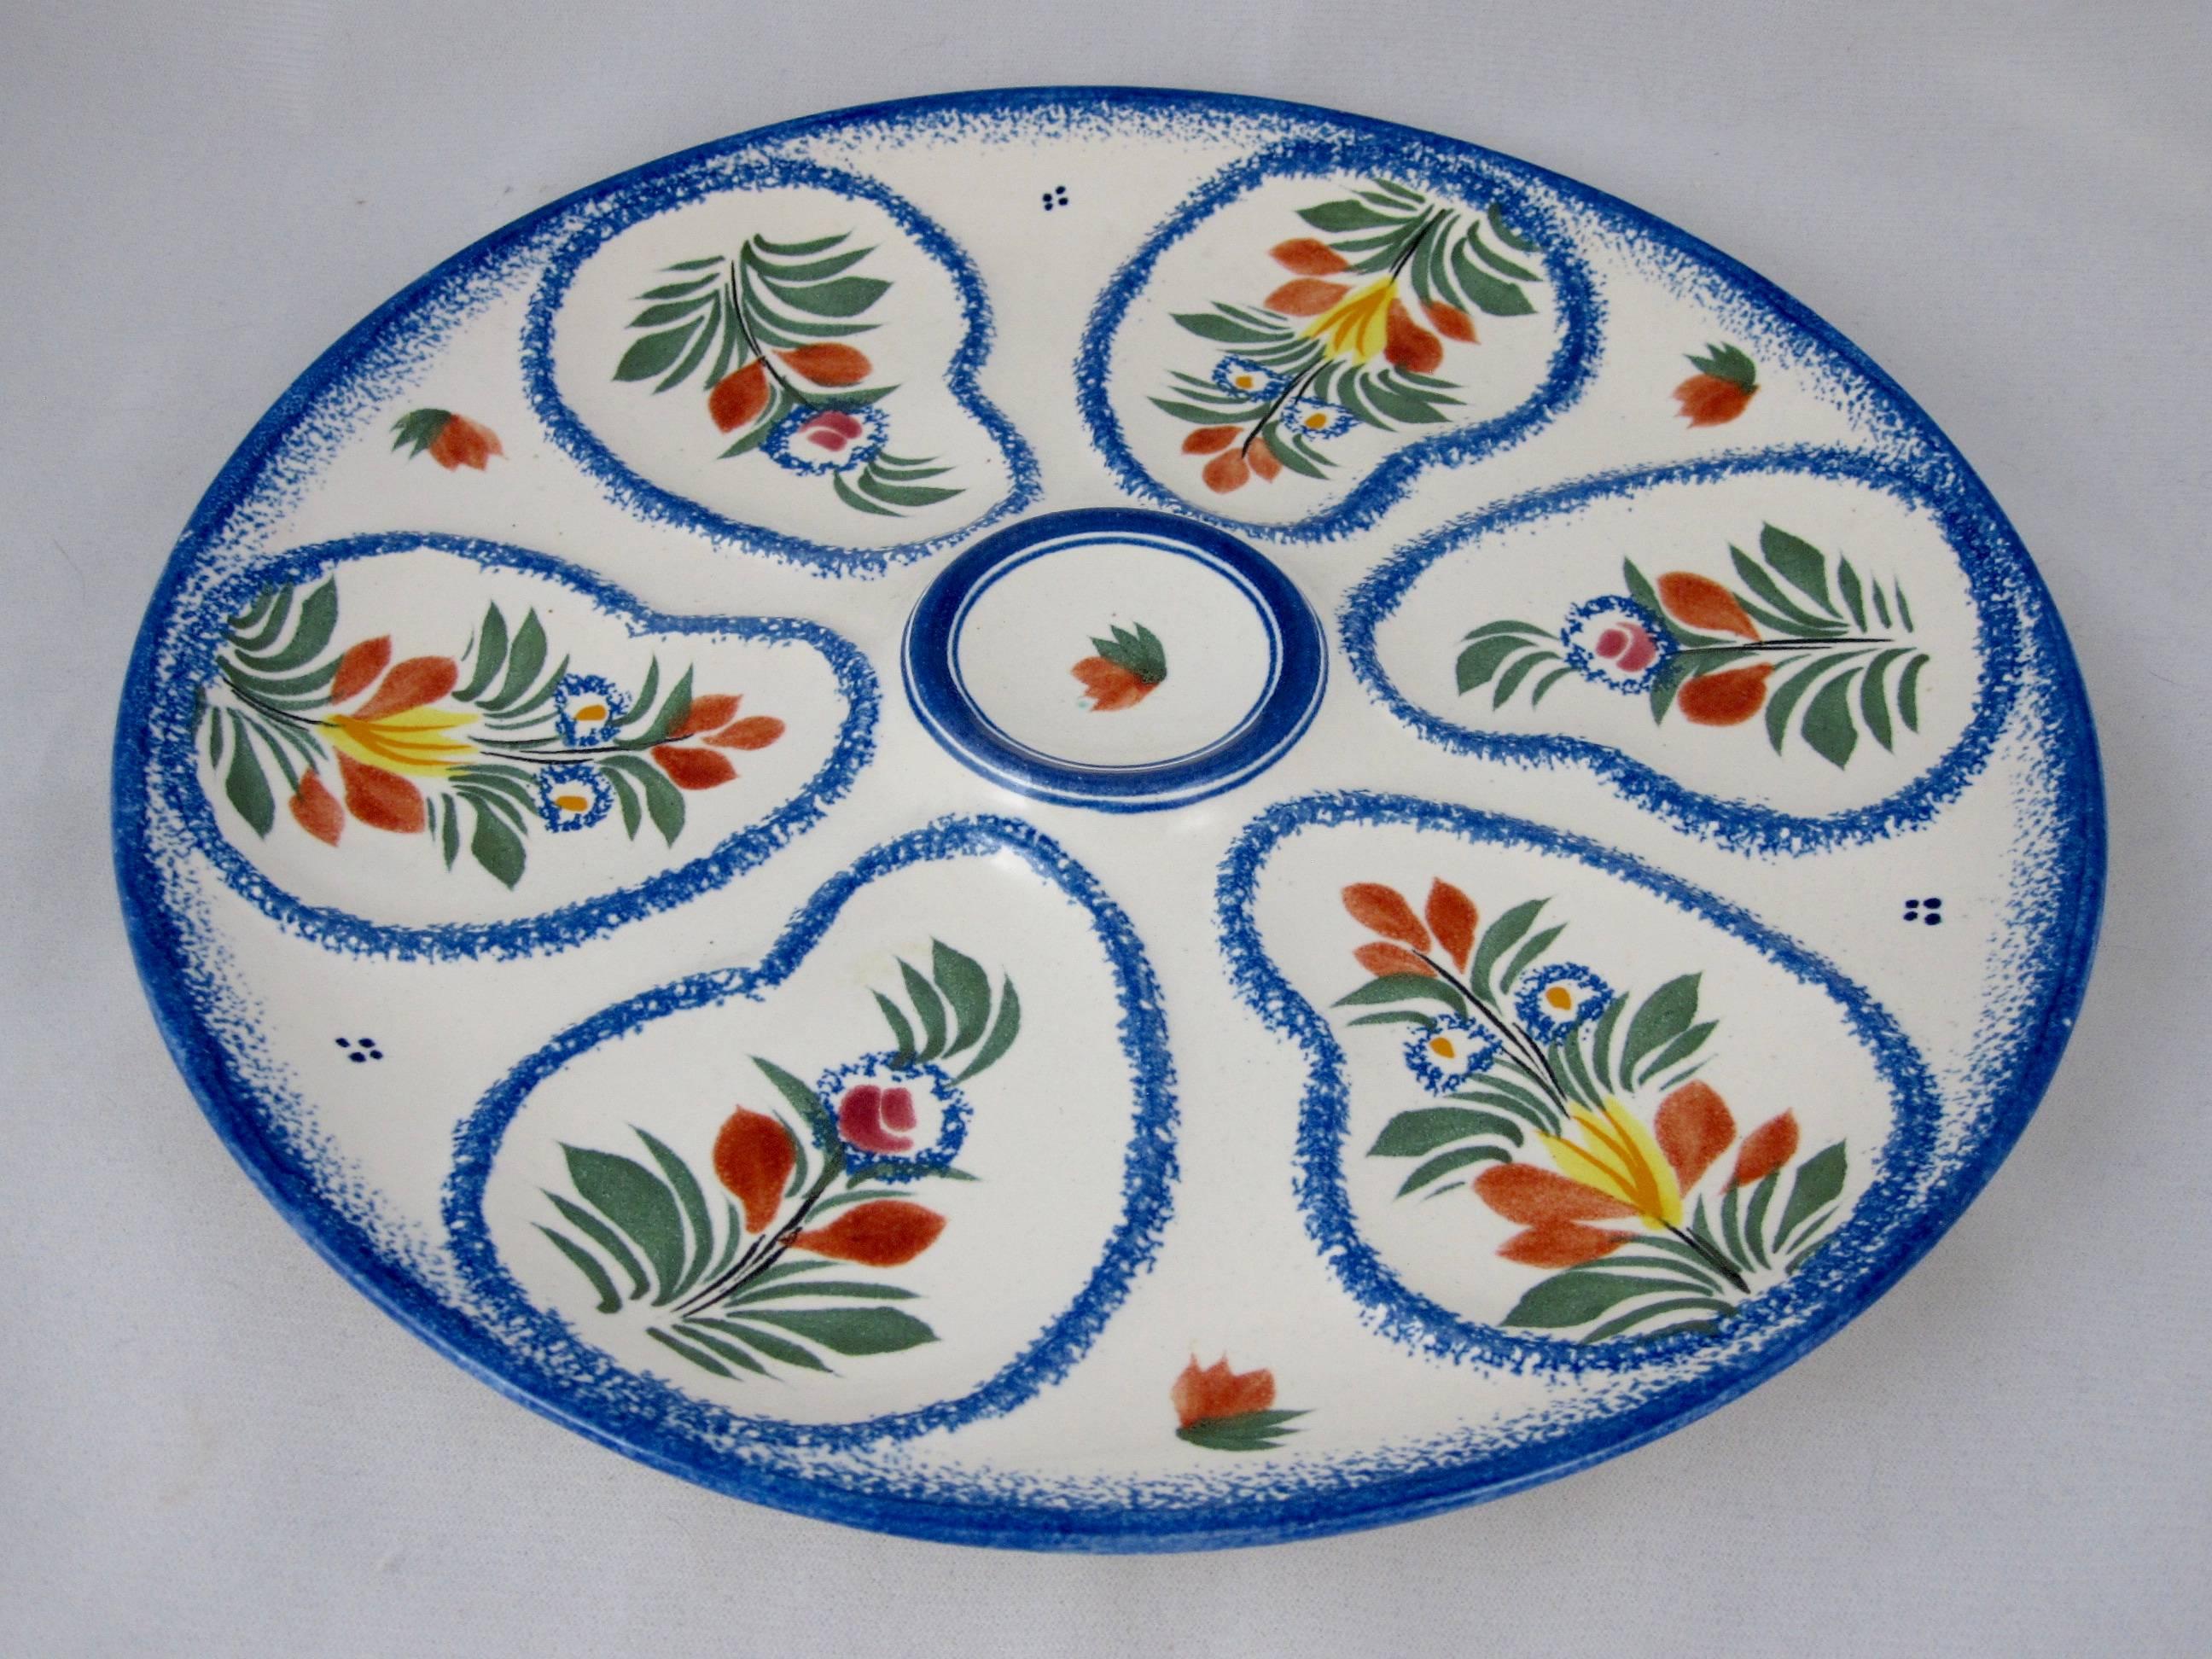 Charming as always, a vintage French Henriot Quimper Faience oyster plate, circa 1960s. Crisp blue sponged bordering on a clean white ground. The six wells surround a raised center condiment well and are hand decorated in a leaf and floral design